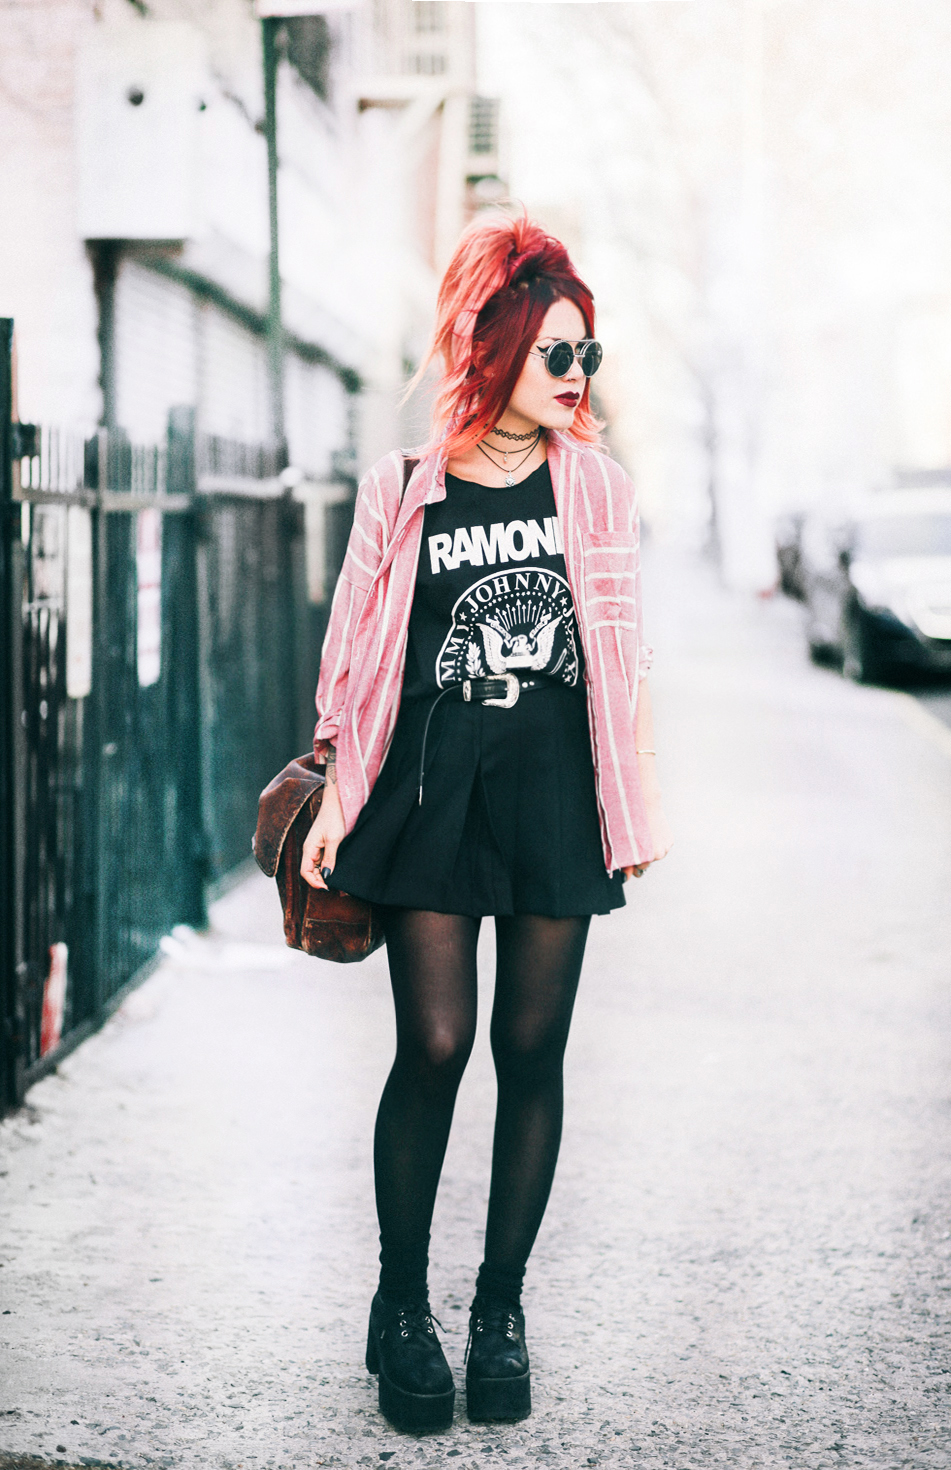 Le Happy wearing Ramones tank and a pleated skirt